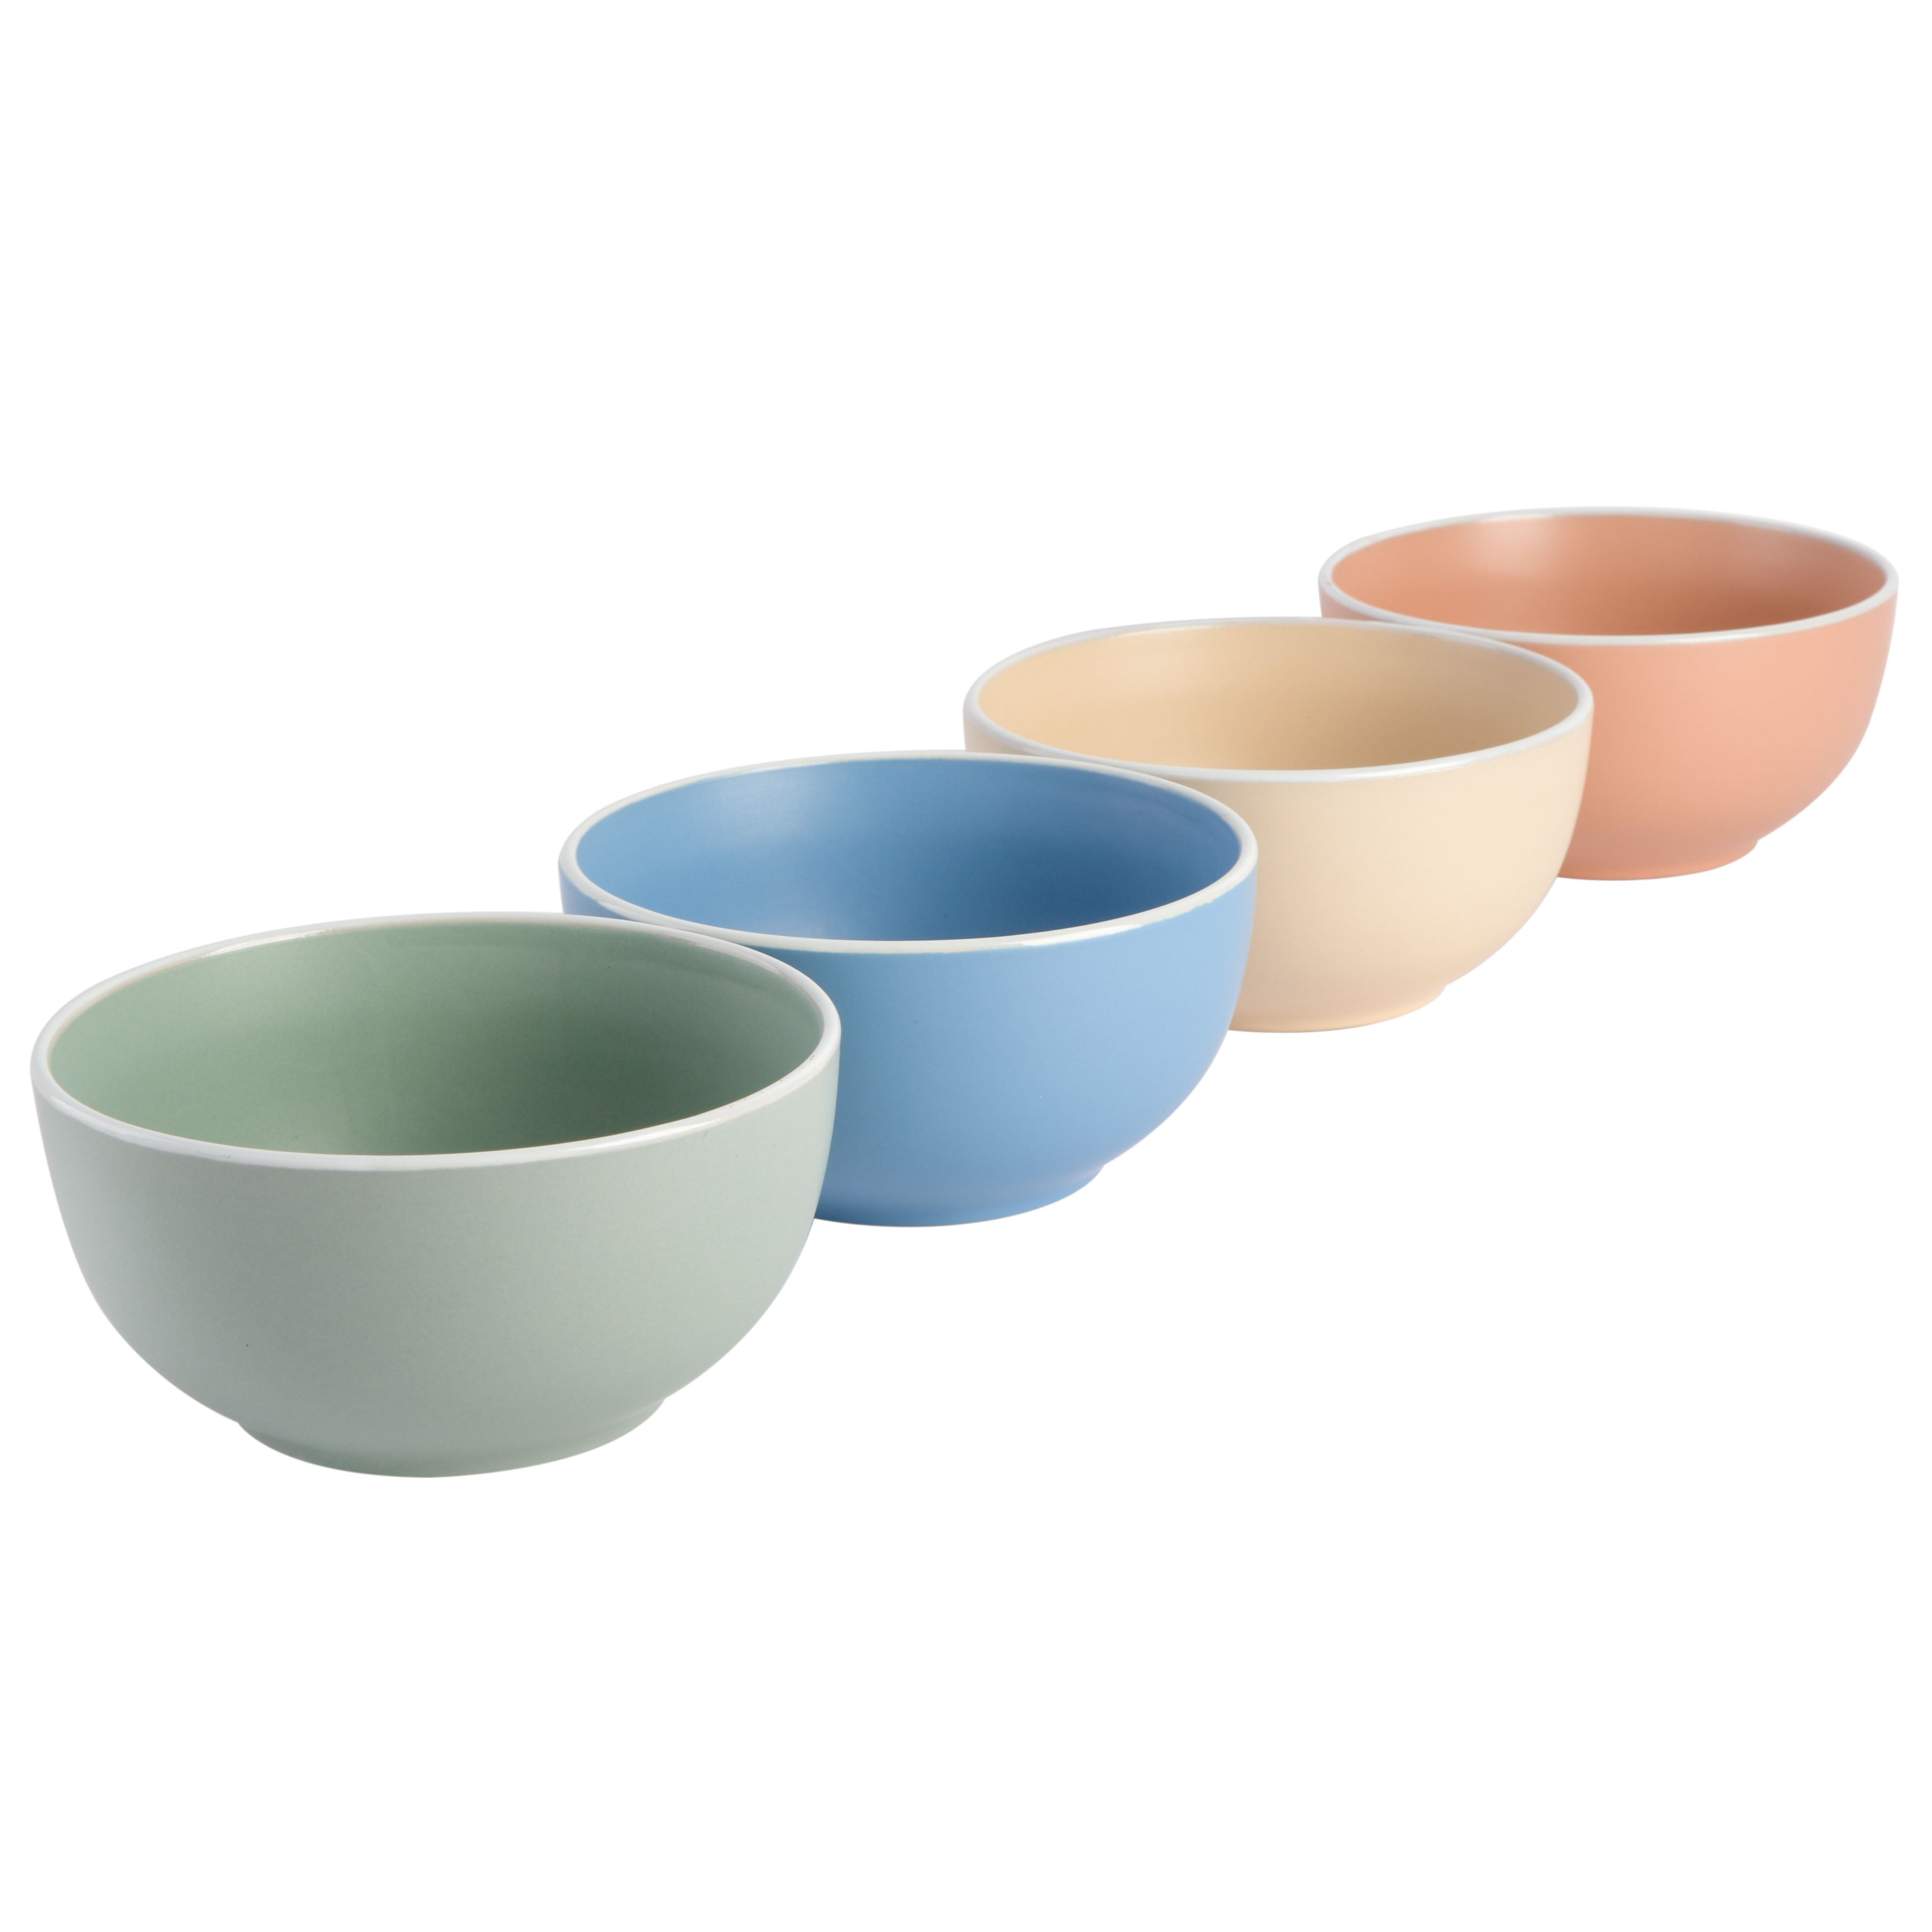 Spice by Tia Mowry Creamy Tahini 4-Piece Cereal Bowl Set